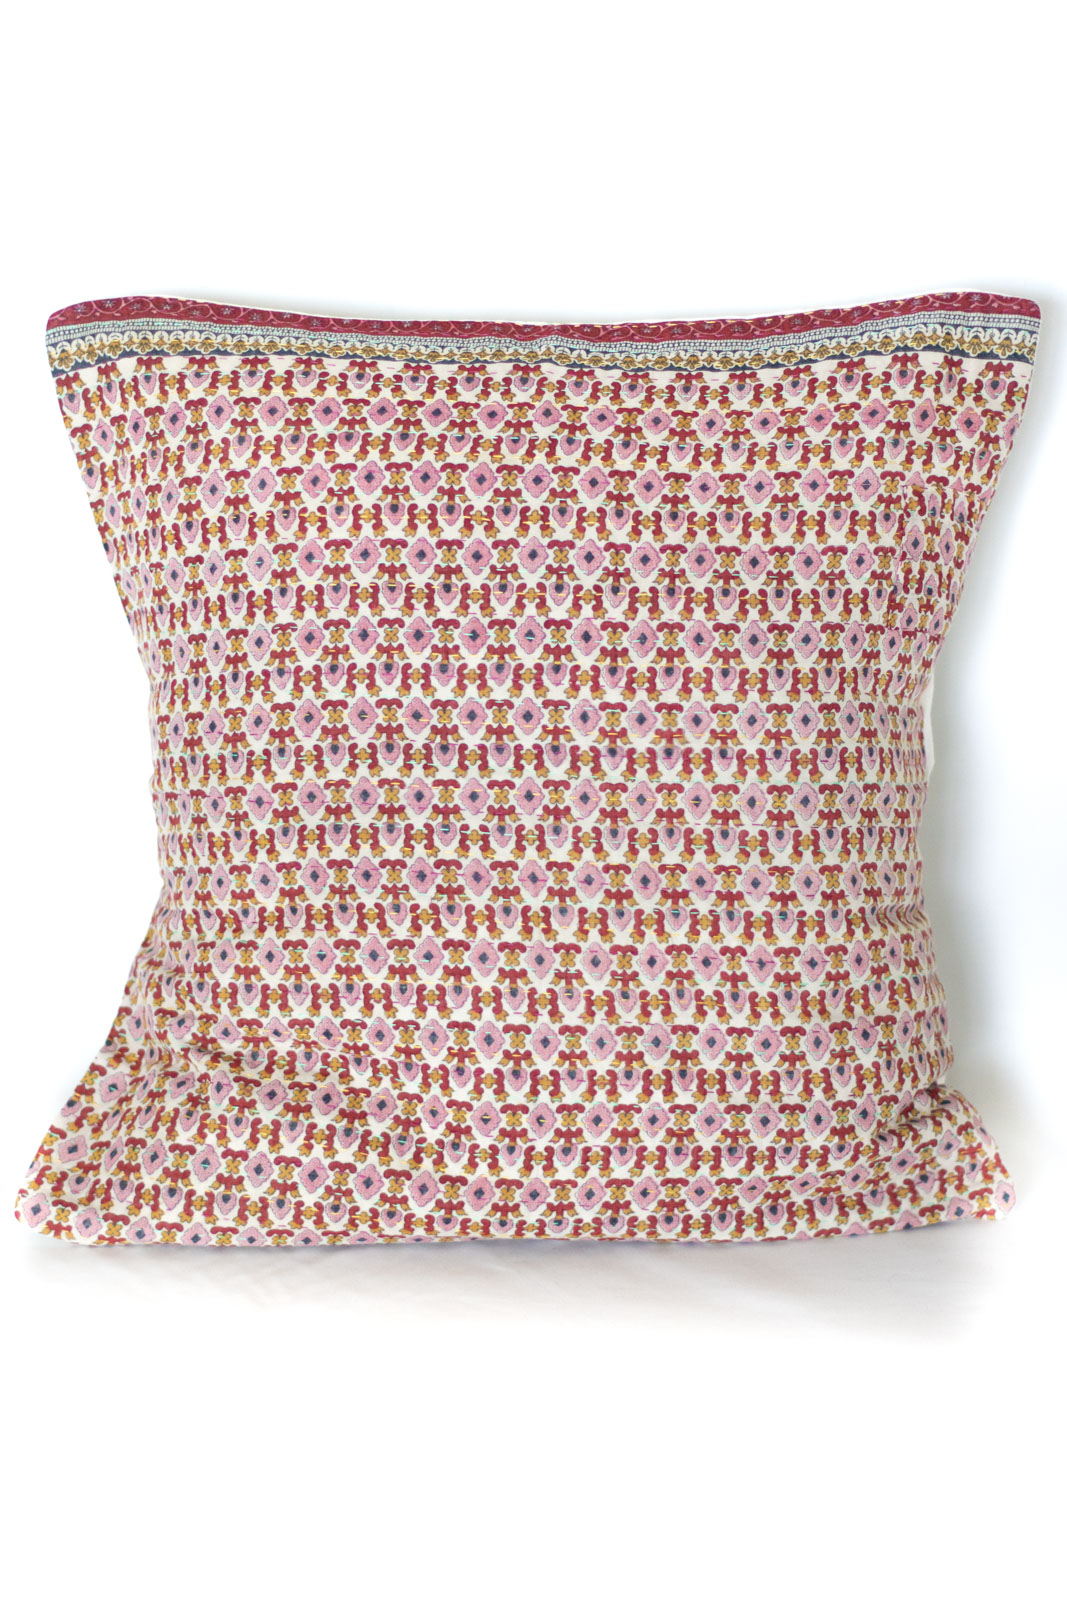 Majestic no. 5 Kantha Pillow Cover